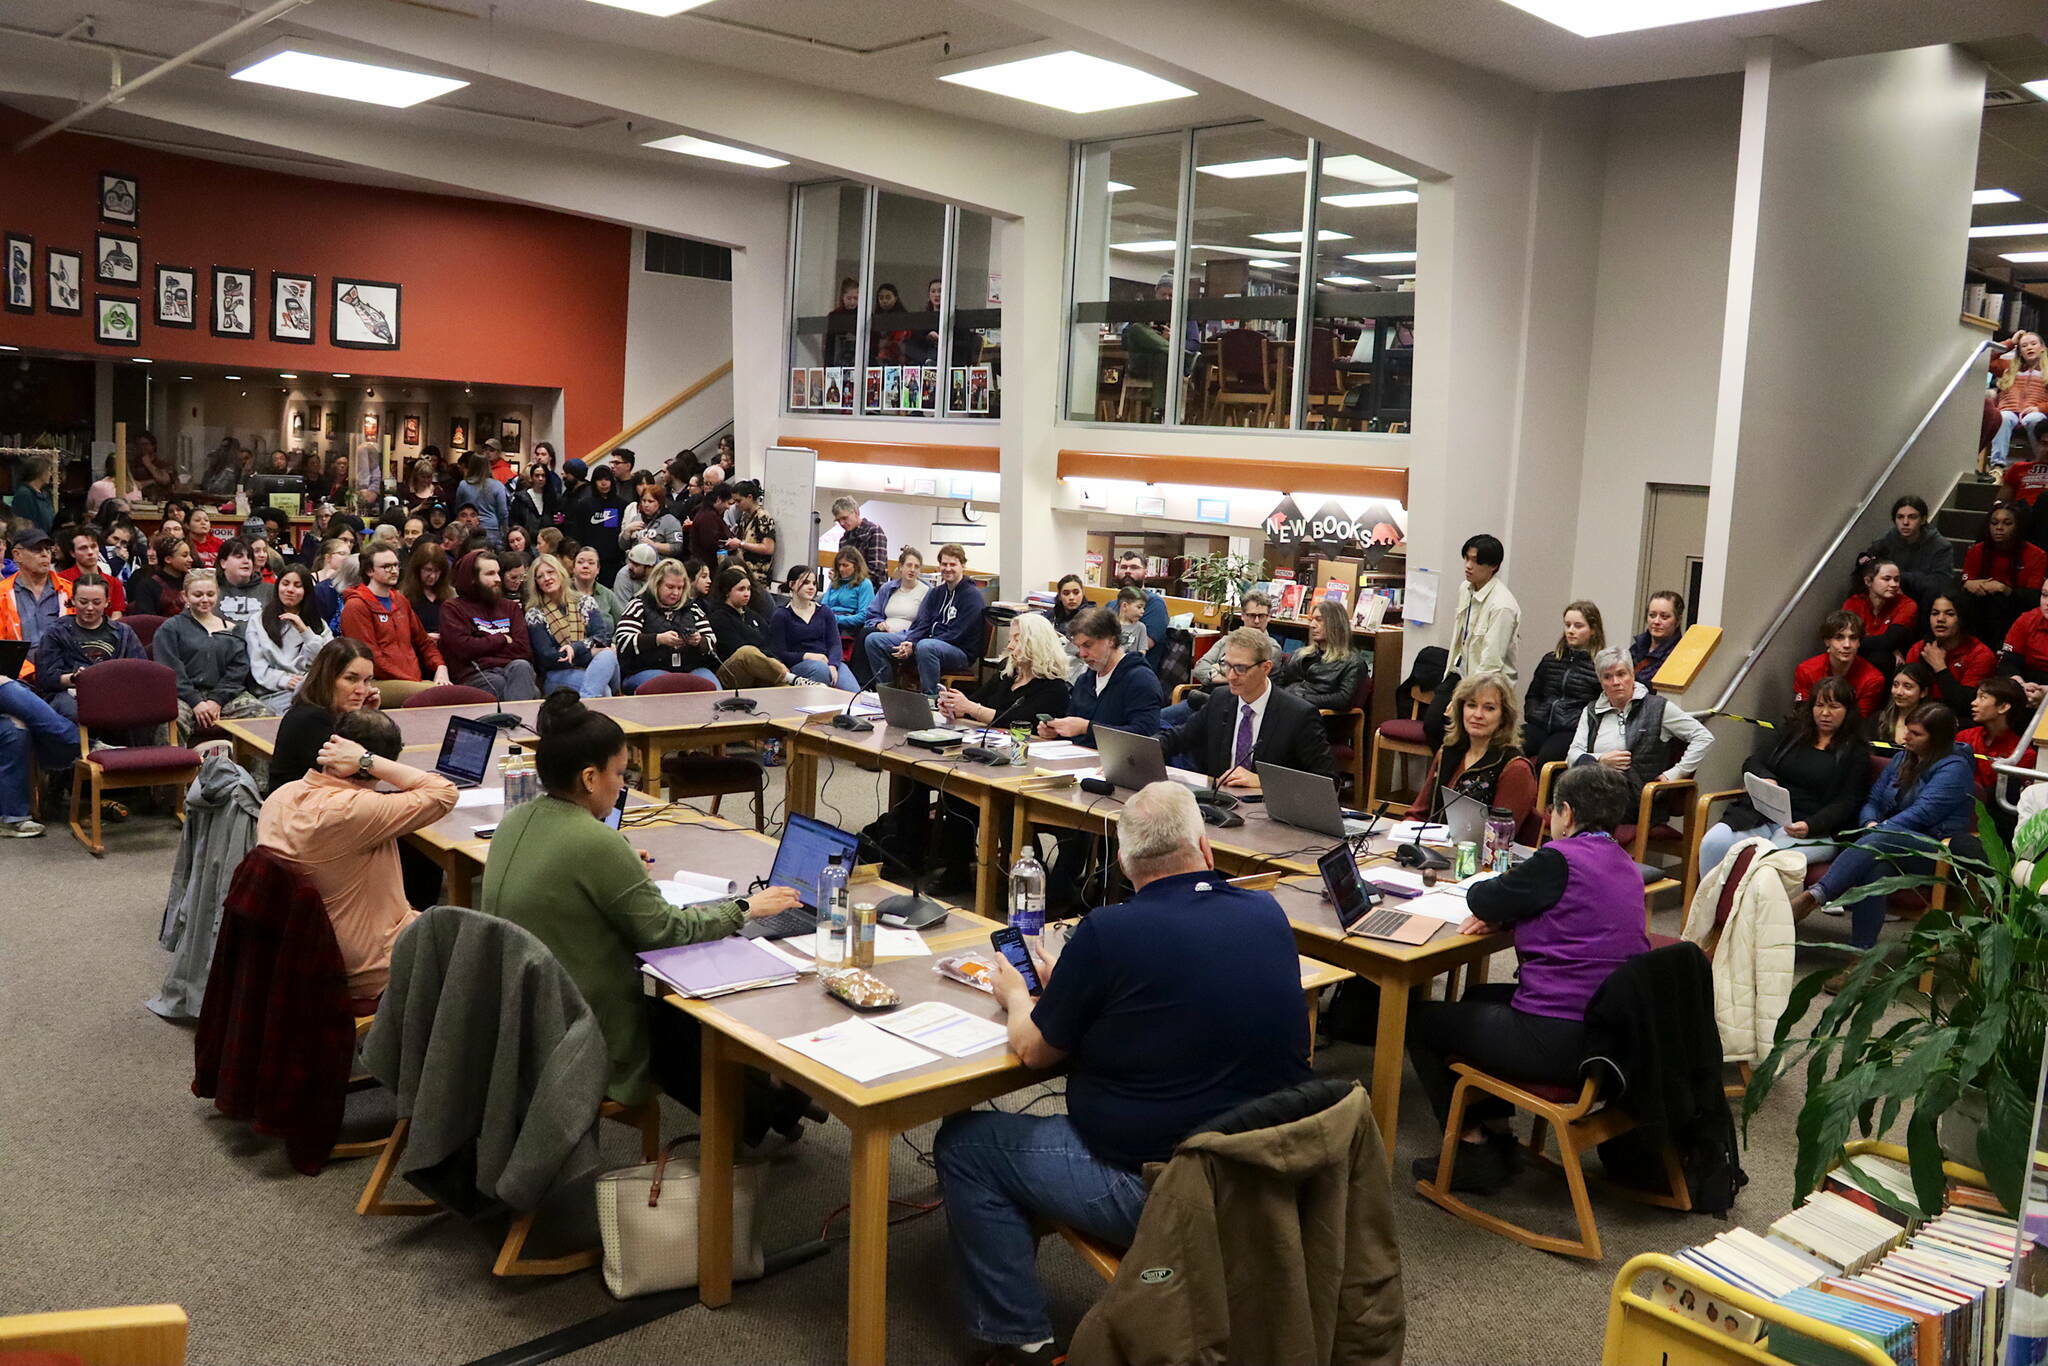 A crowd overflows the library at Juneau-Douglas High School: Yadaa.at Kalé on Feb. 22 as school board members meet to consider proposals to address the Juneau School District’s budget crisis. (Mark Sabbatini / Juneau Empire file photo)